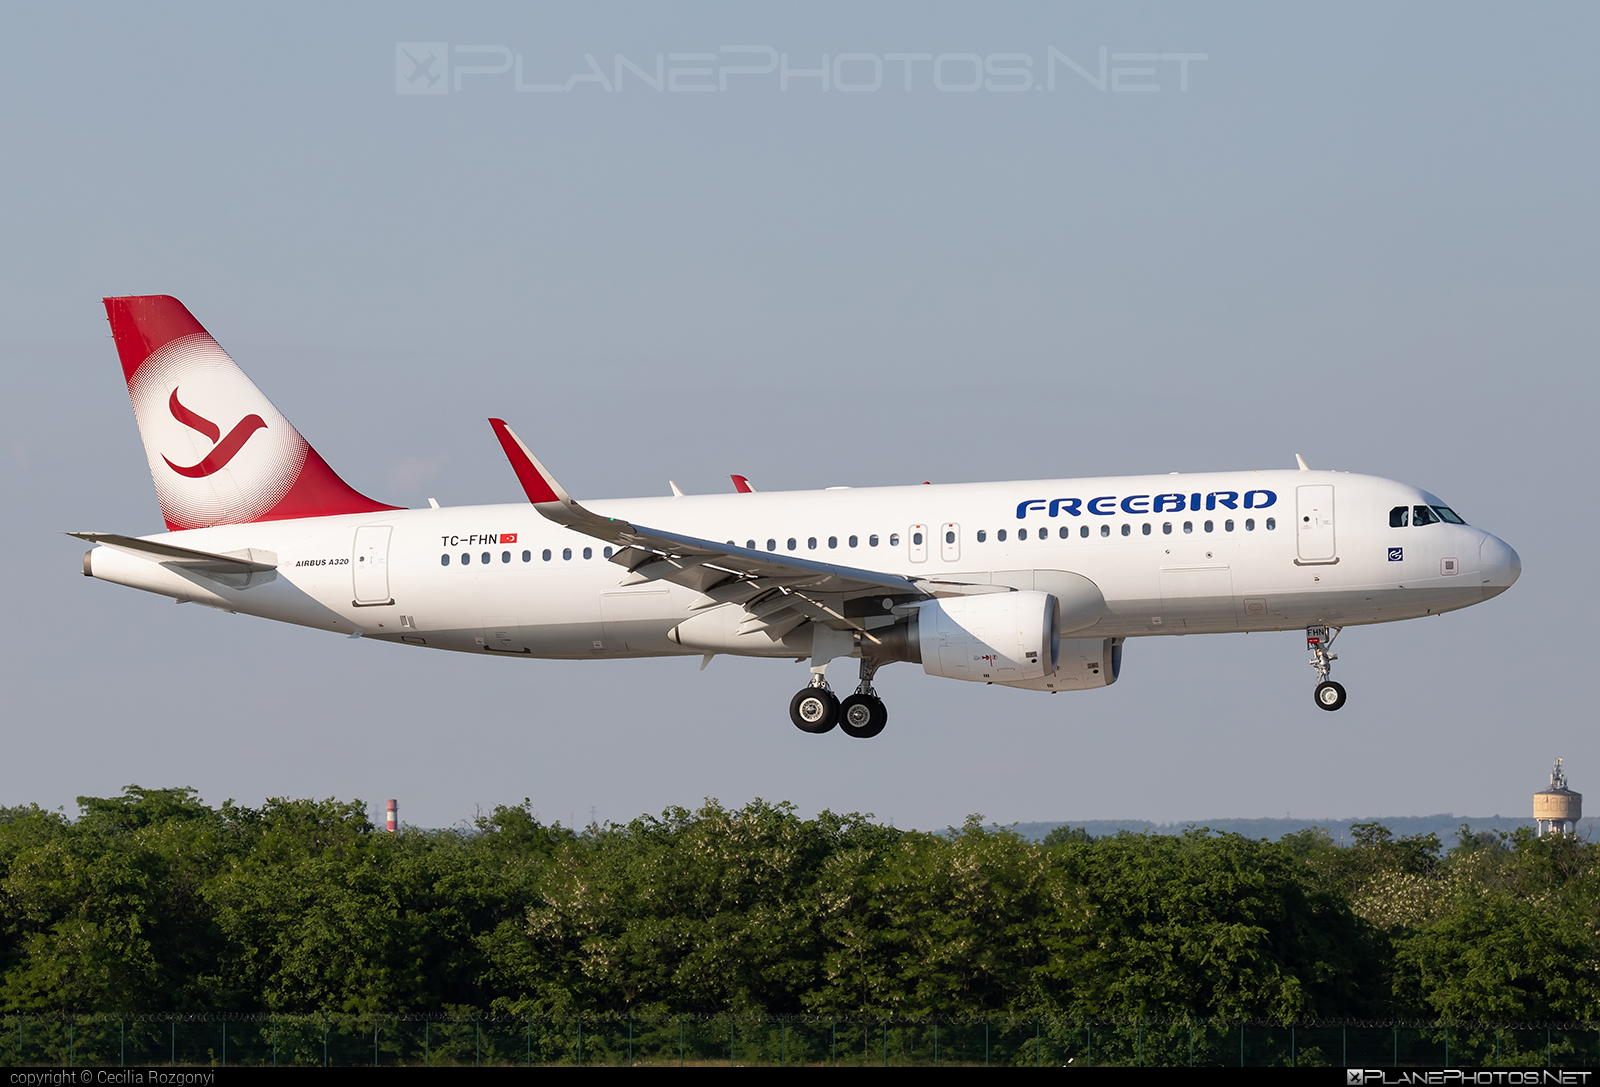 Airbus A320-214 - TC-FHN operated by Freebird Airlines #FreebirdAirlines #a320 #a320family #airbus #airbus320